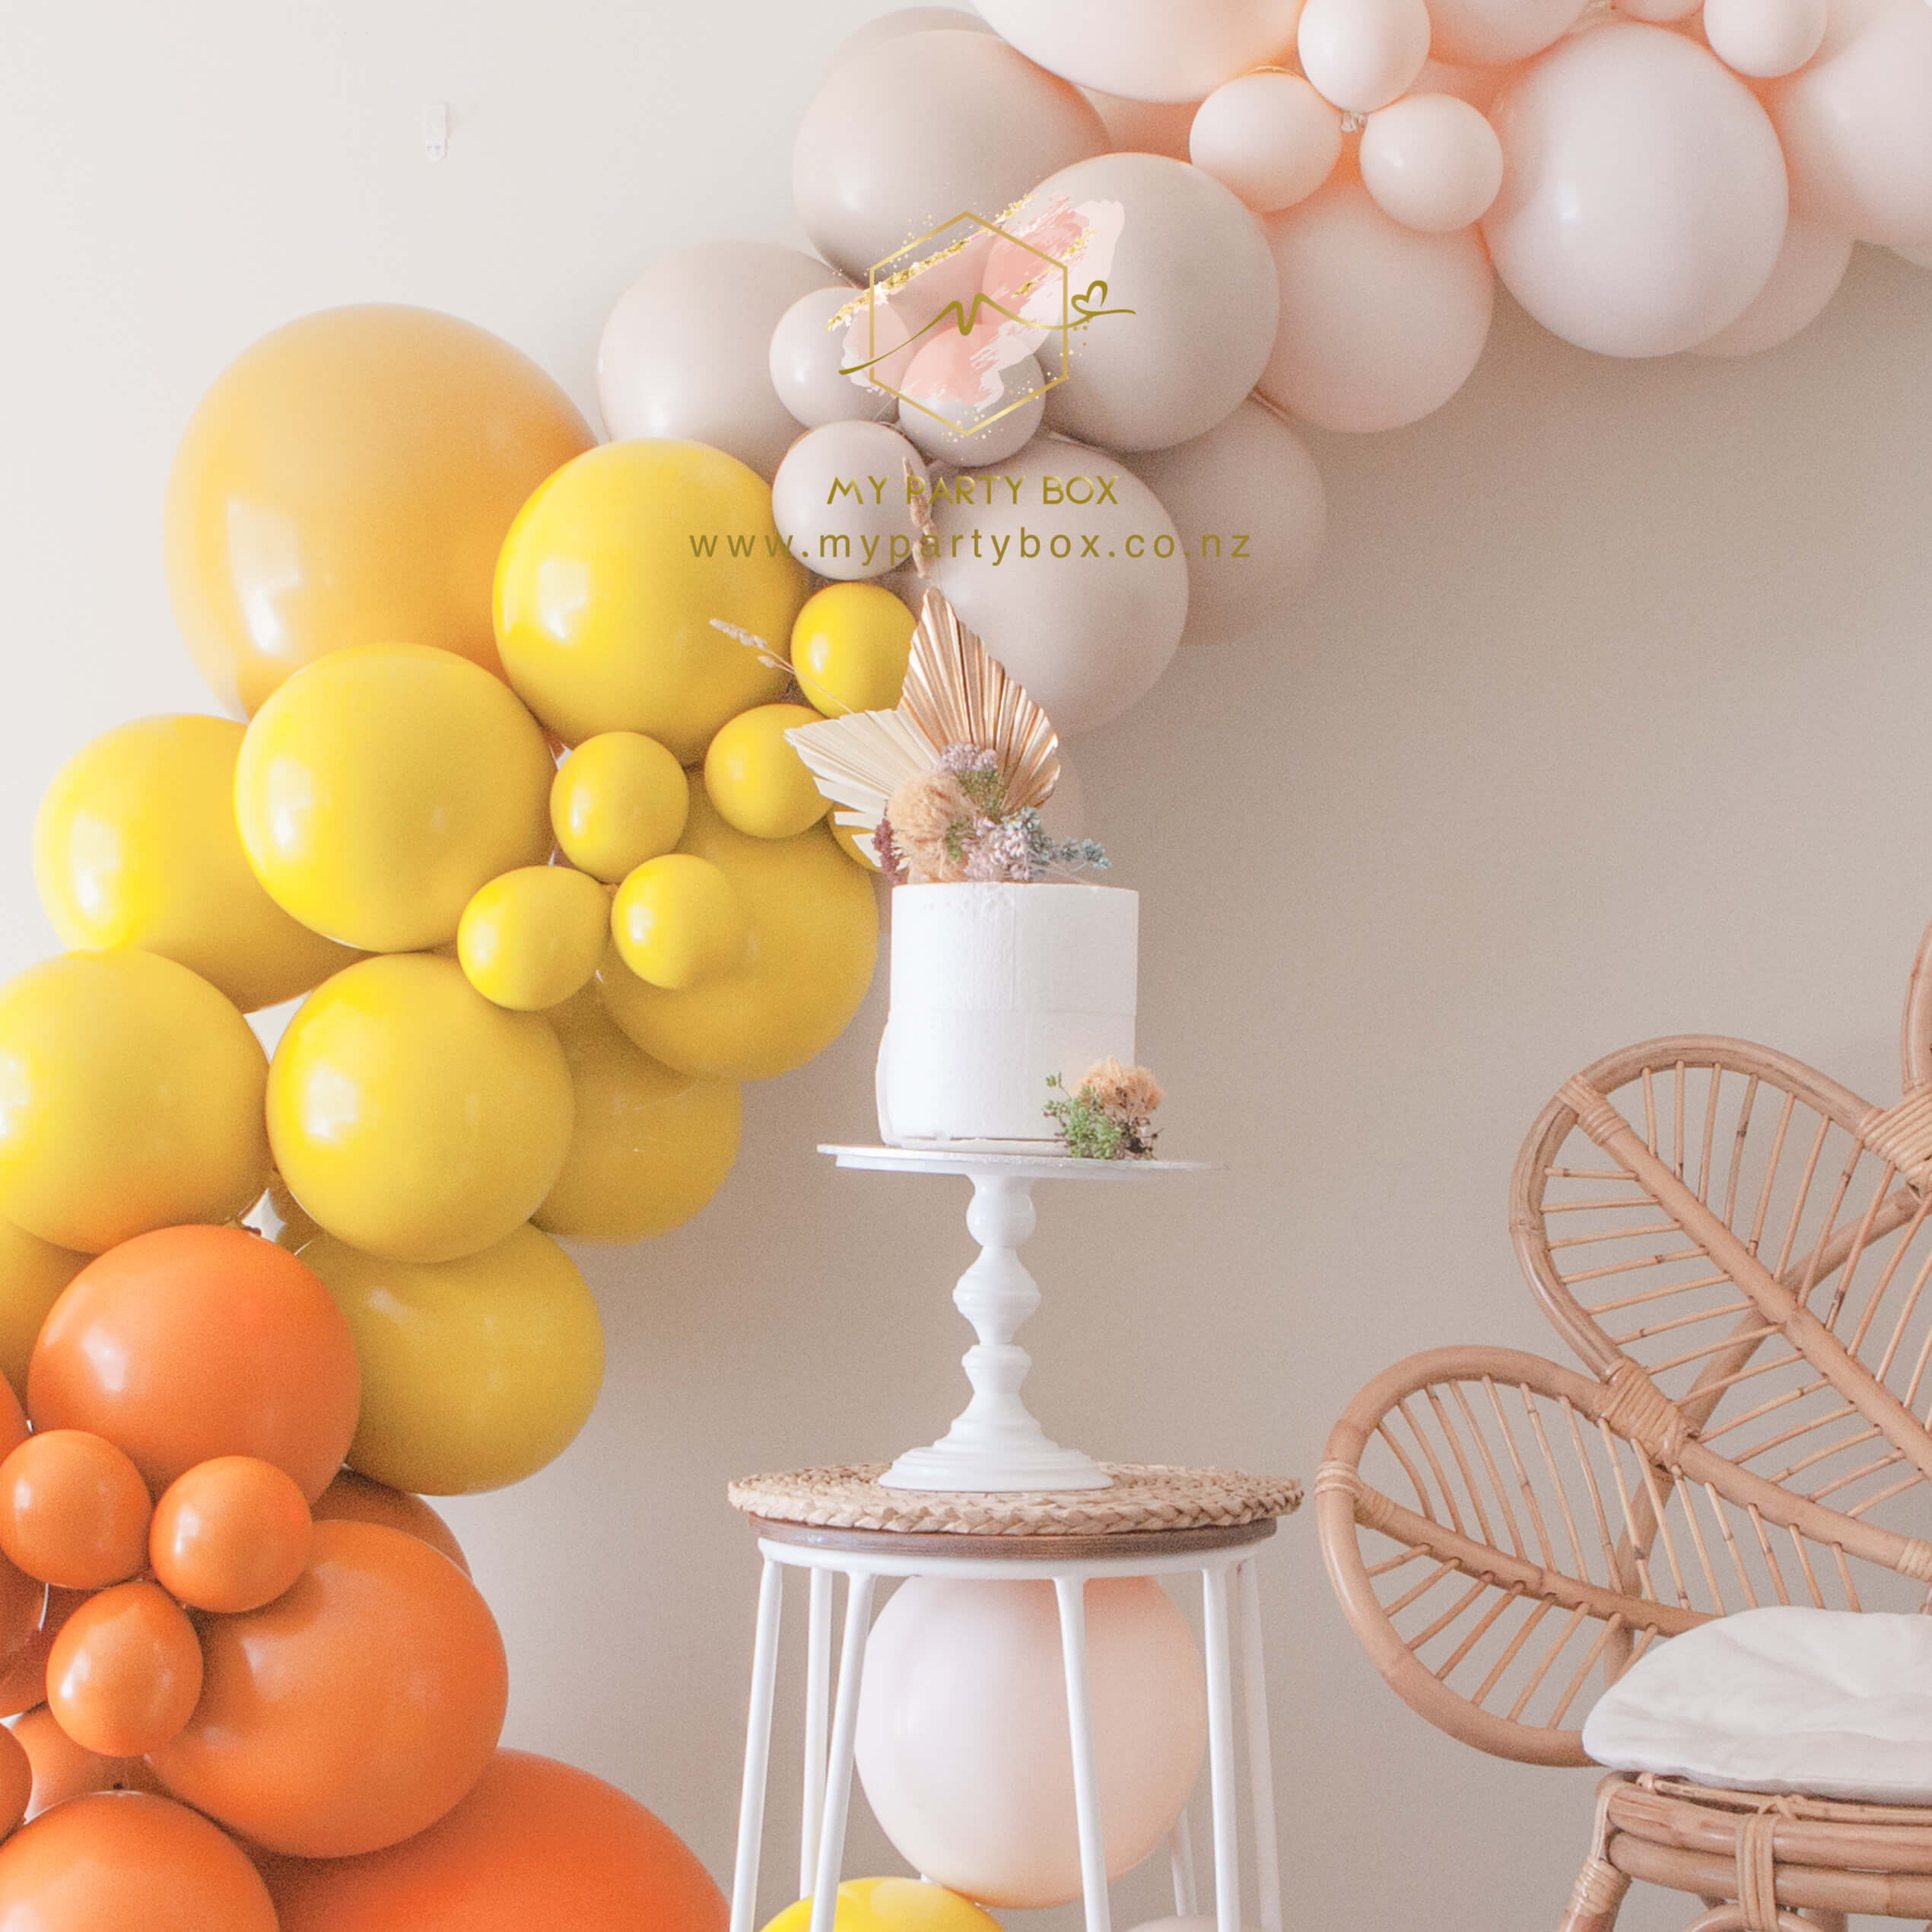 My Party Box Luxe Lion King Balloon Garland DIY Kit with Bright Orange, Bright Mustard, Teddy Sand, Blush Chalk and White Latex Balloons